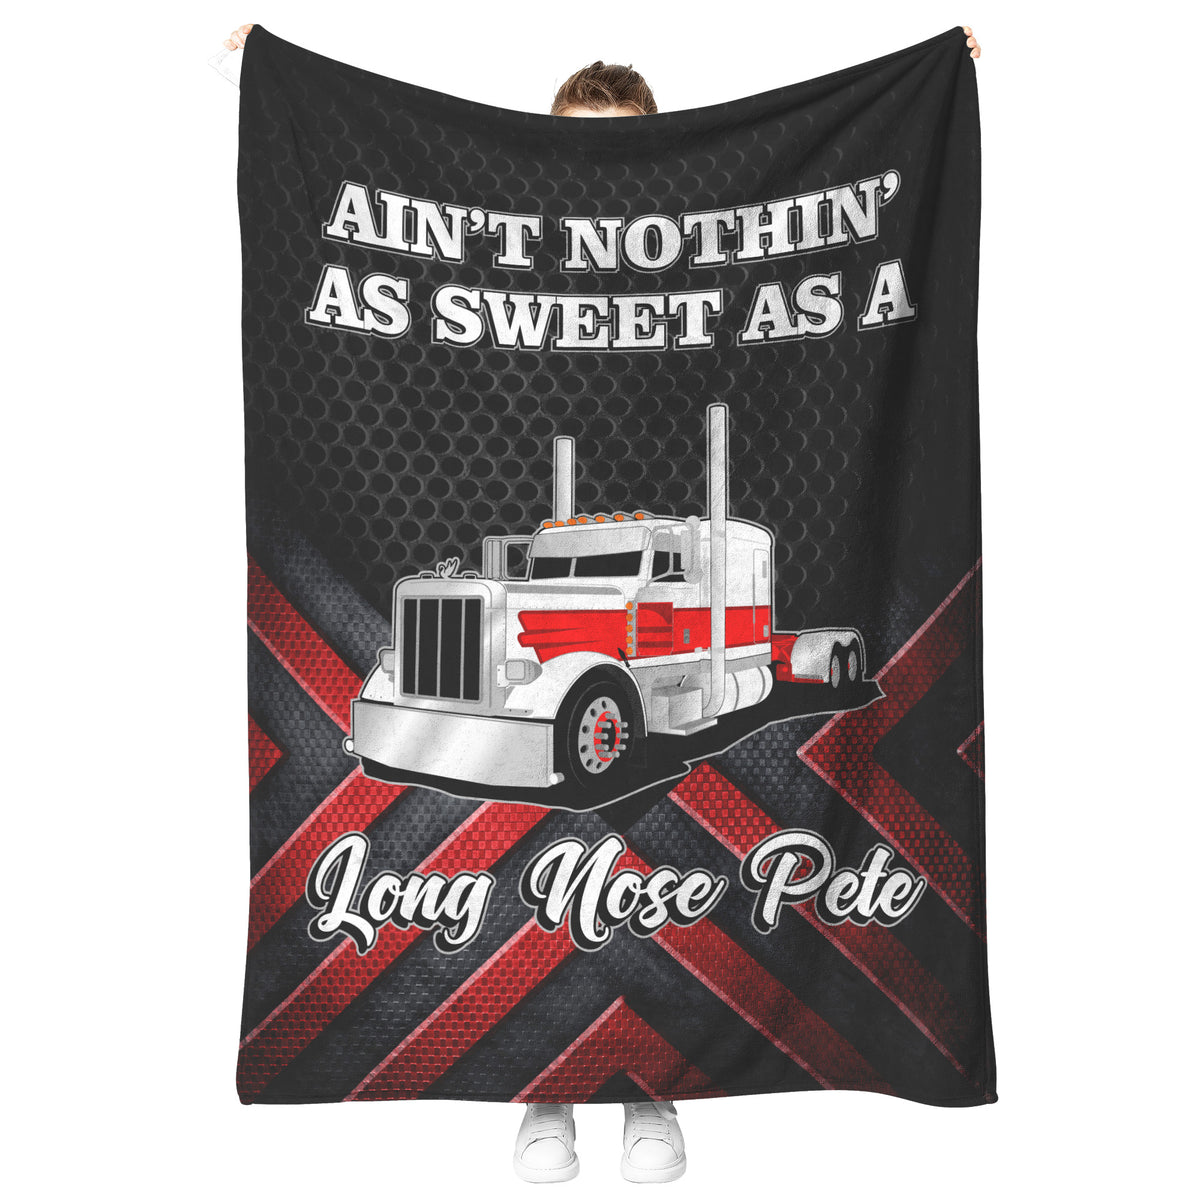 Ain't Nothin' As Sweet As a Long Nose Pete - Blanket